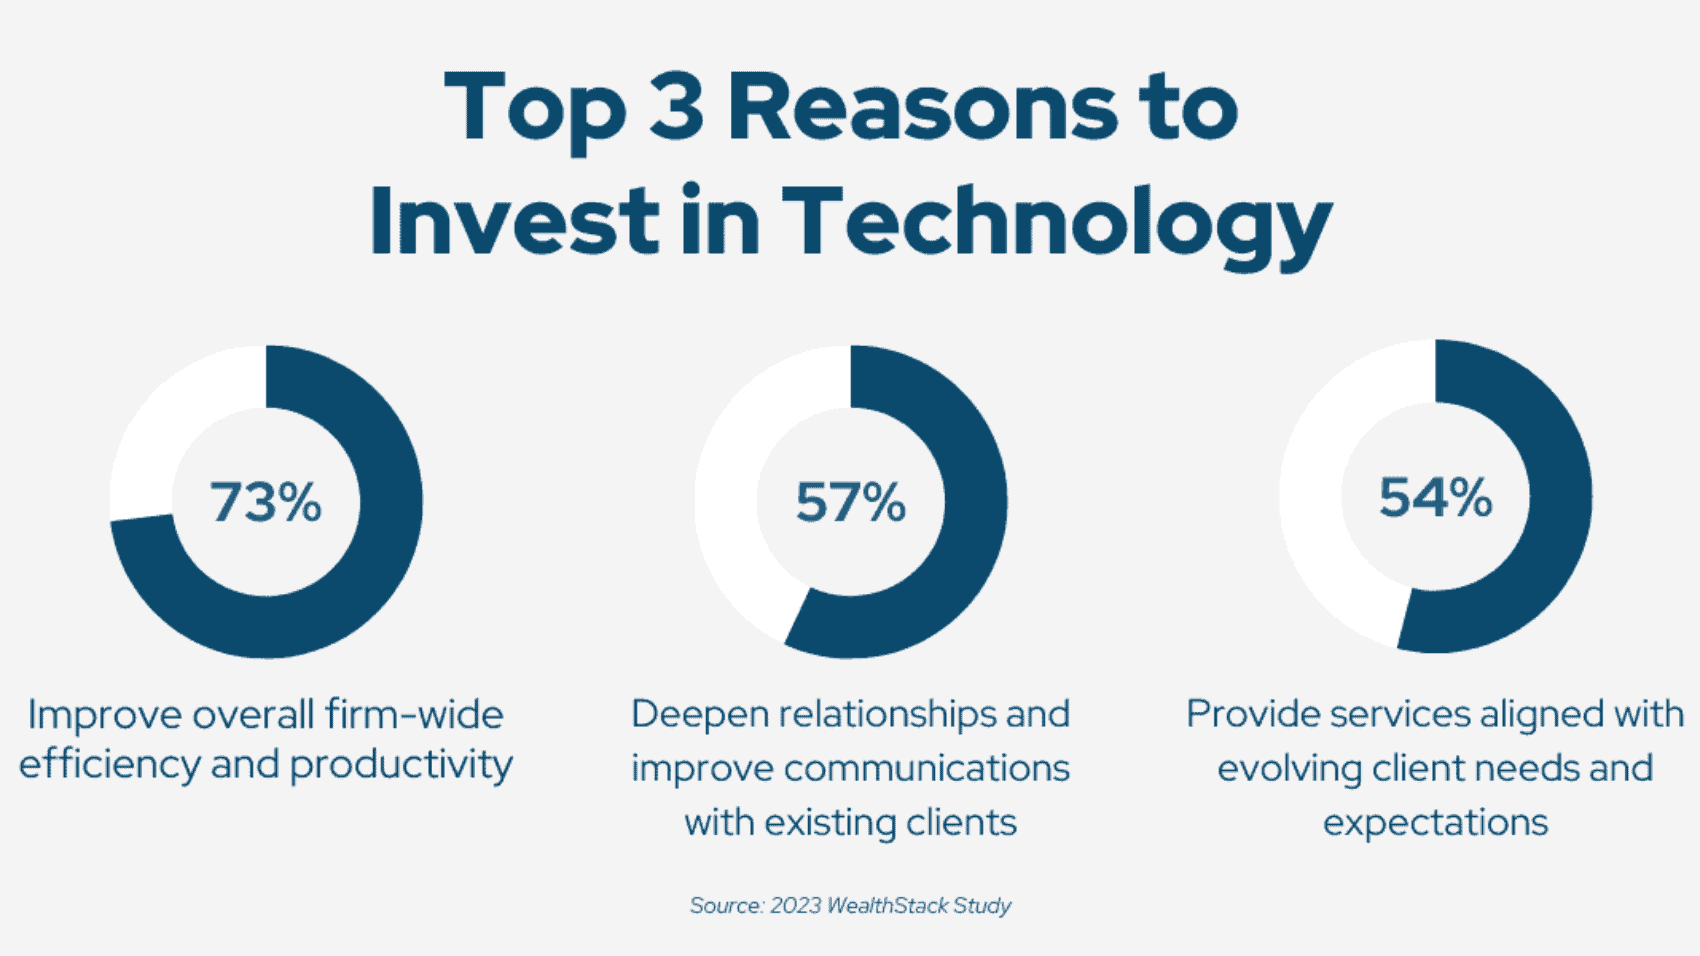 2023 WealthStack Survey - Top 3 Reasons to Invest in Technology